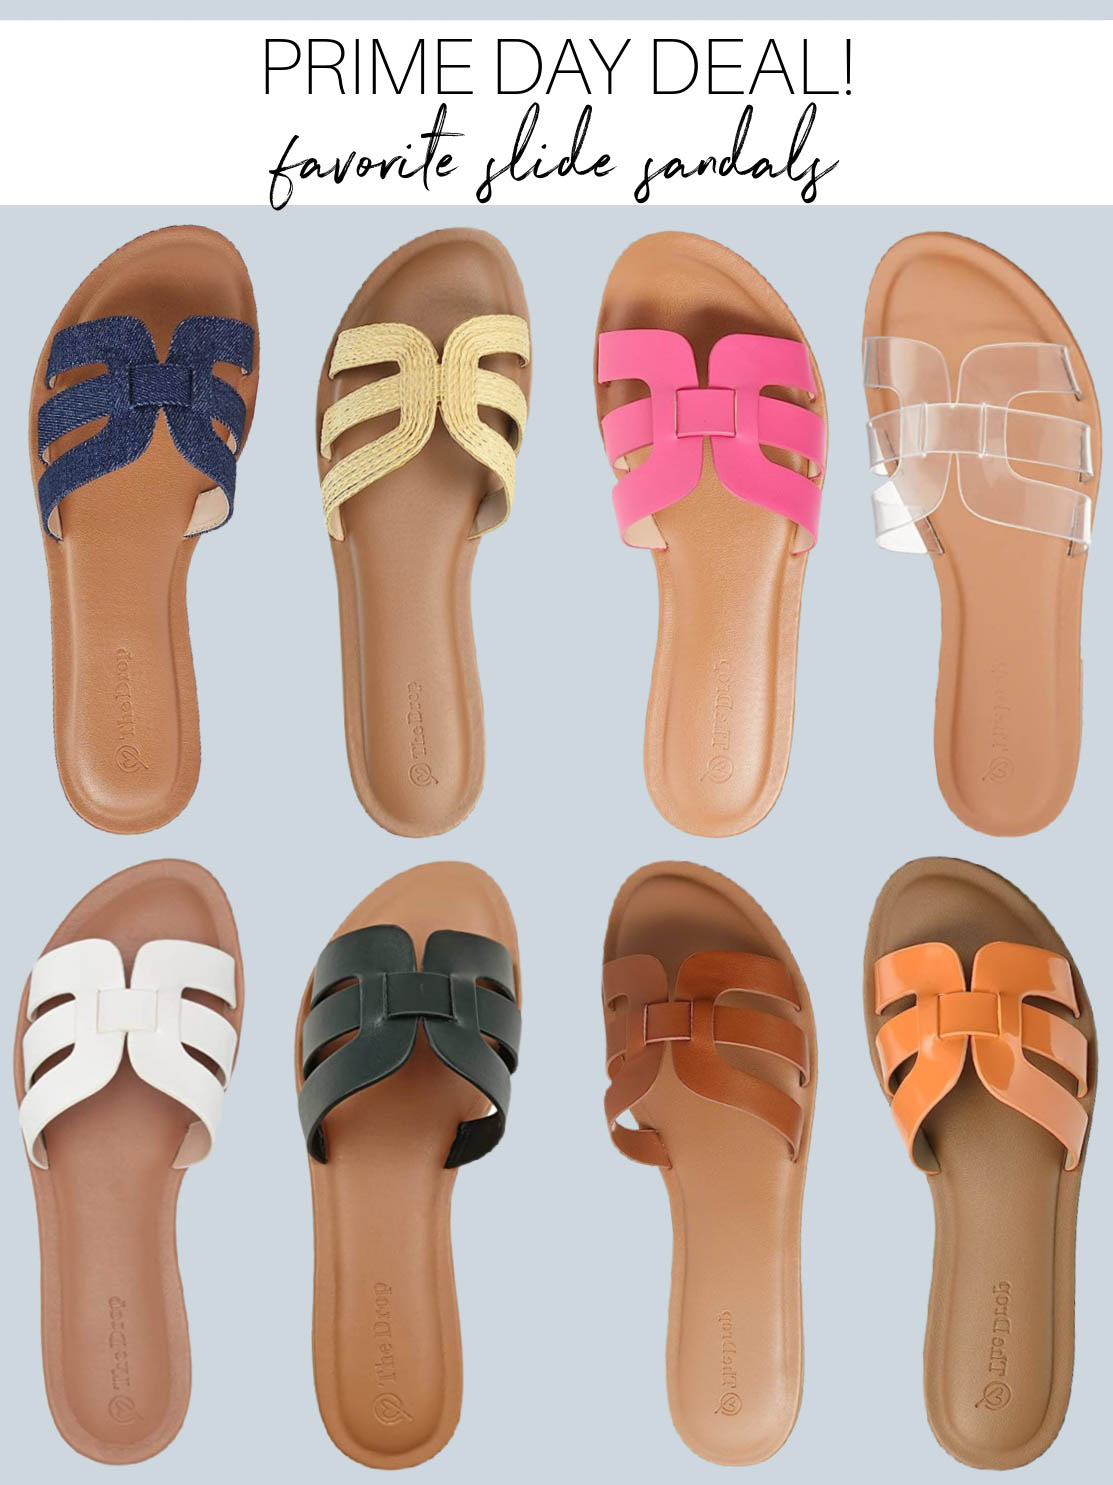 Slide sandals on sale for Amazon Prime Day